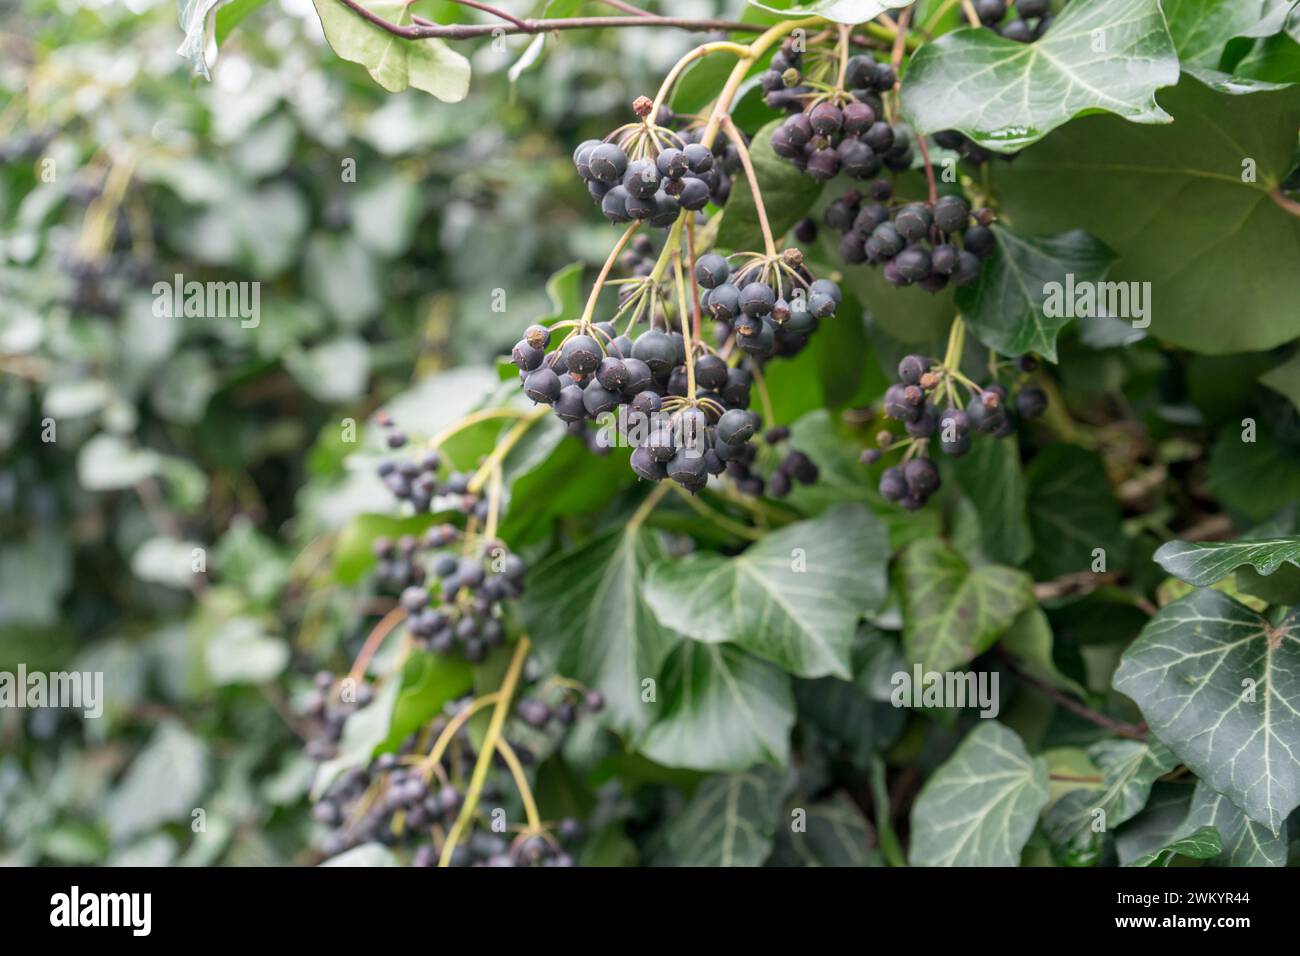 Detail of an ivy plant with berries Stock Photo